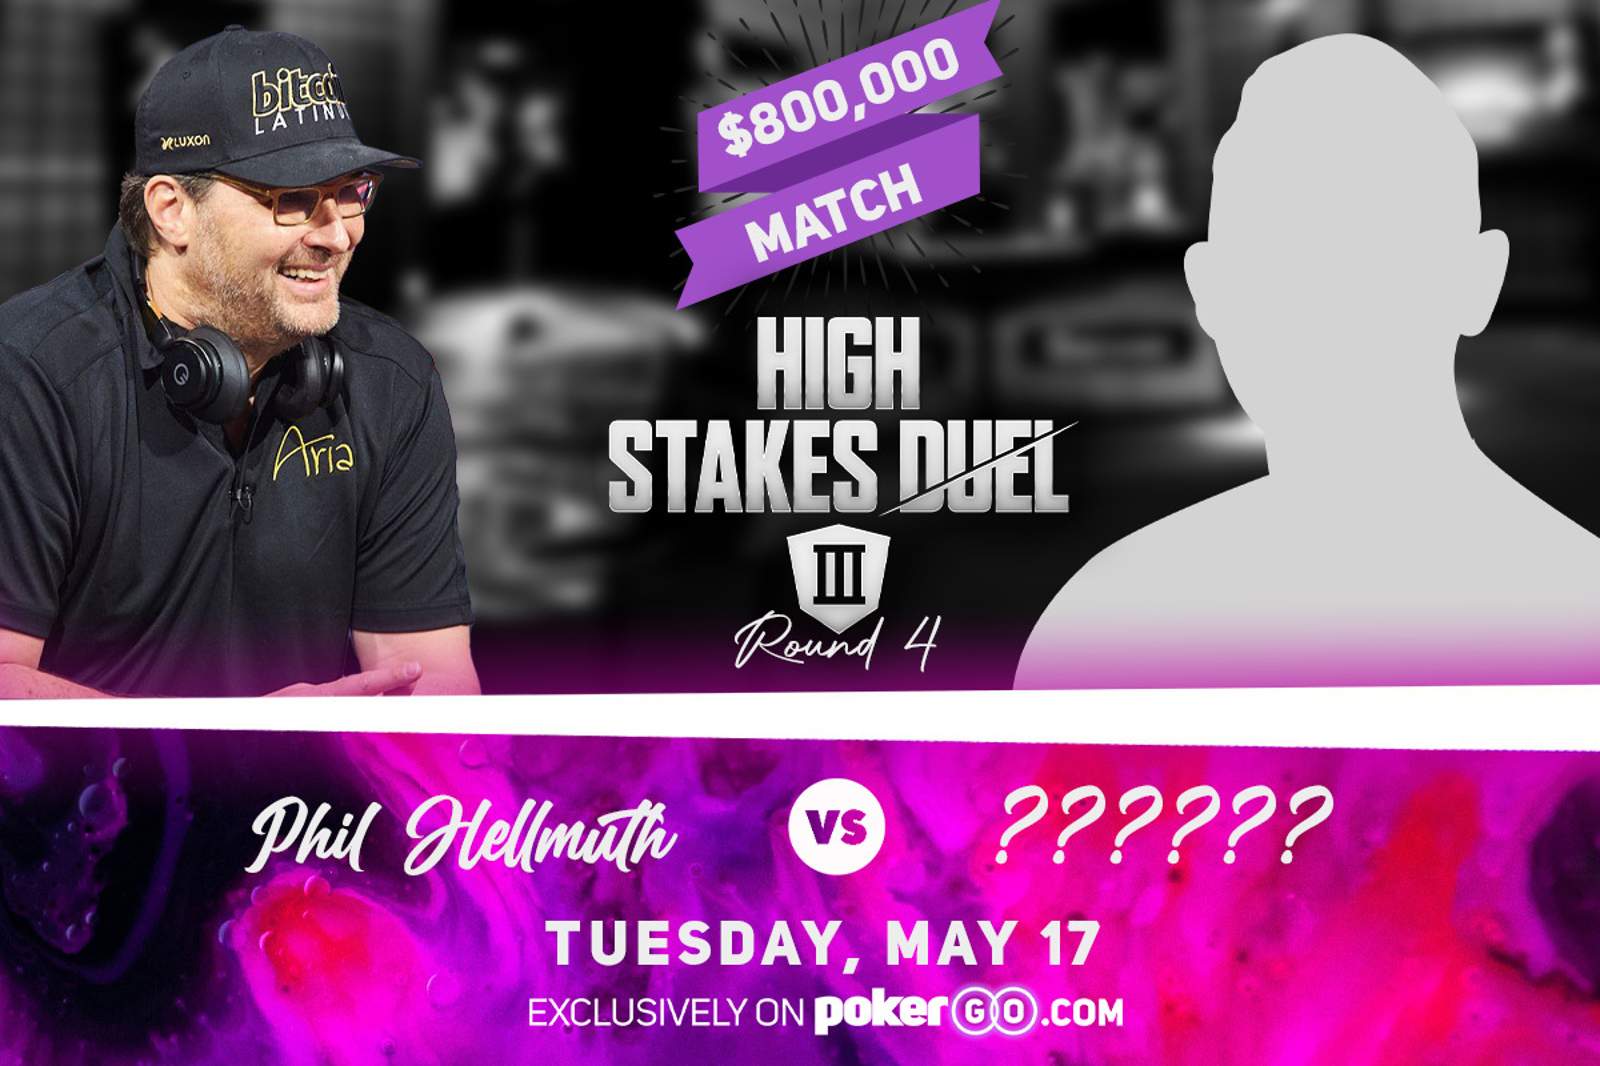 Phil Hellmuth To Face New Opponent in Round 4 of High Stakes Duel III for $800,000